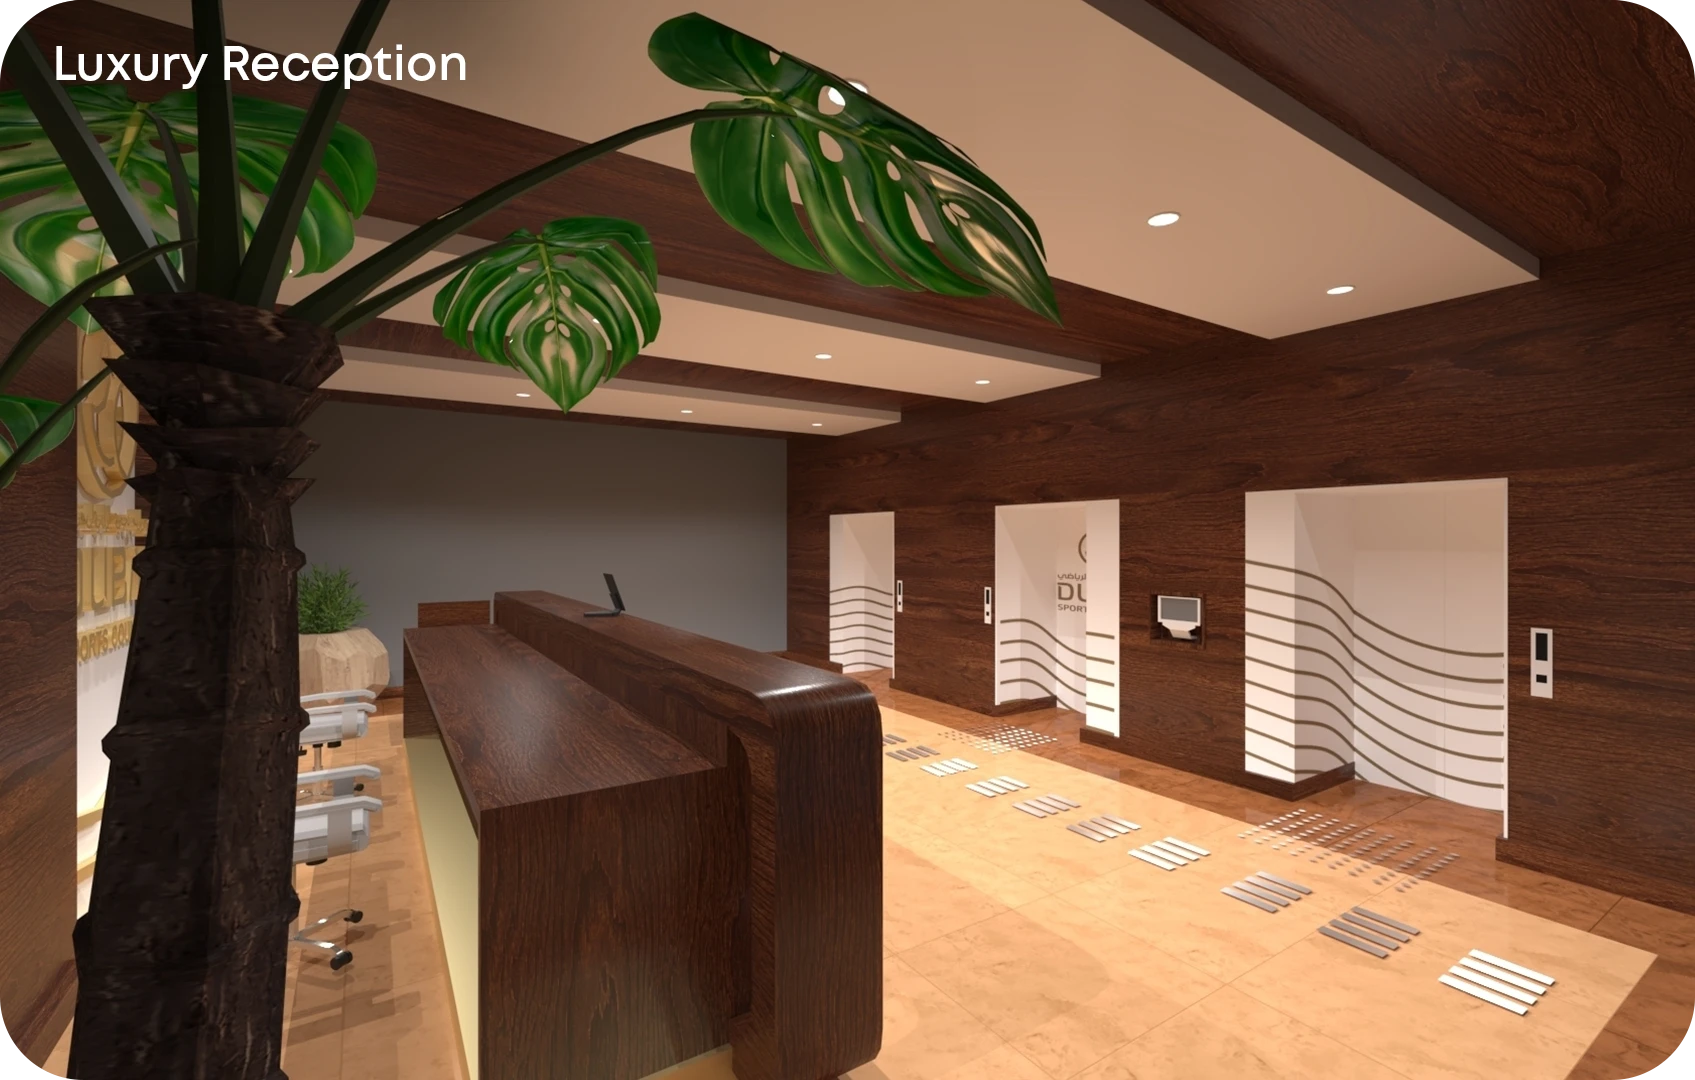 3764-luxury-reception-1.png